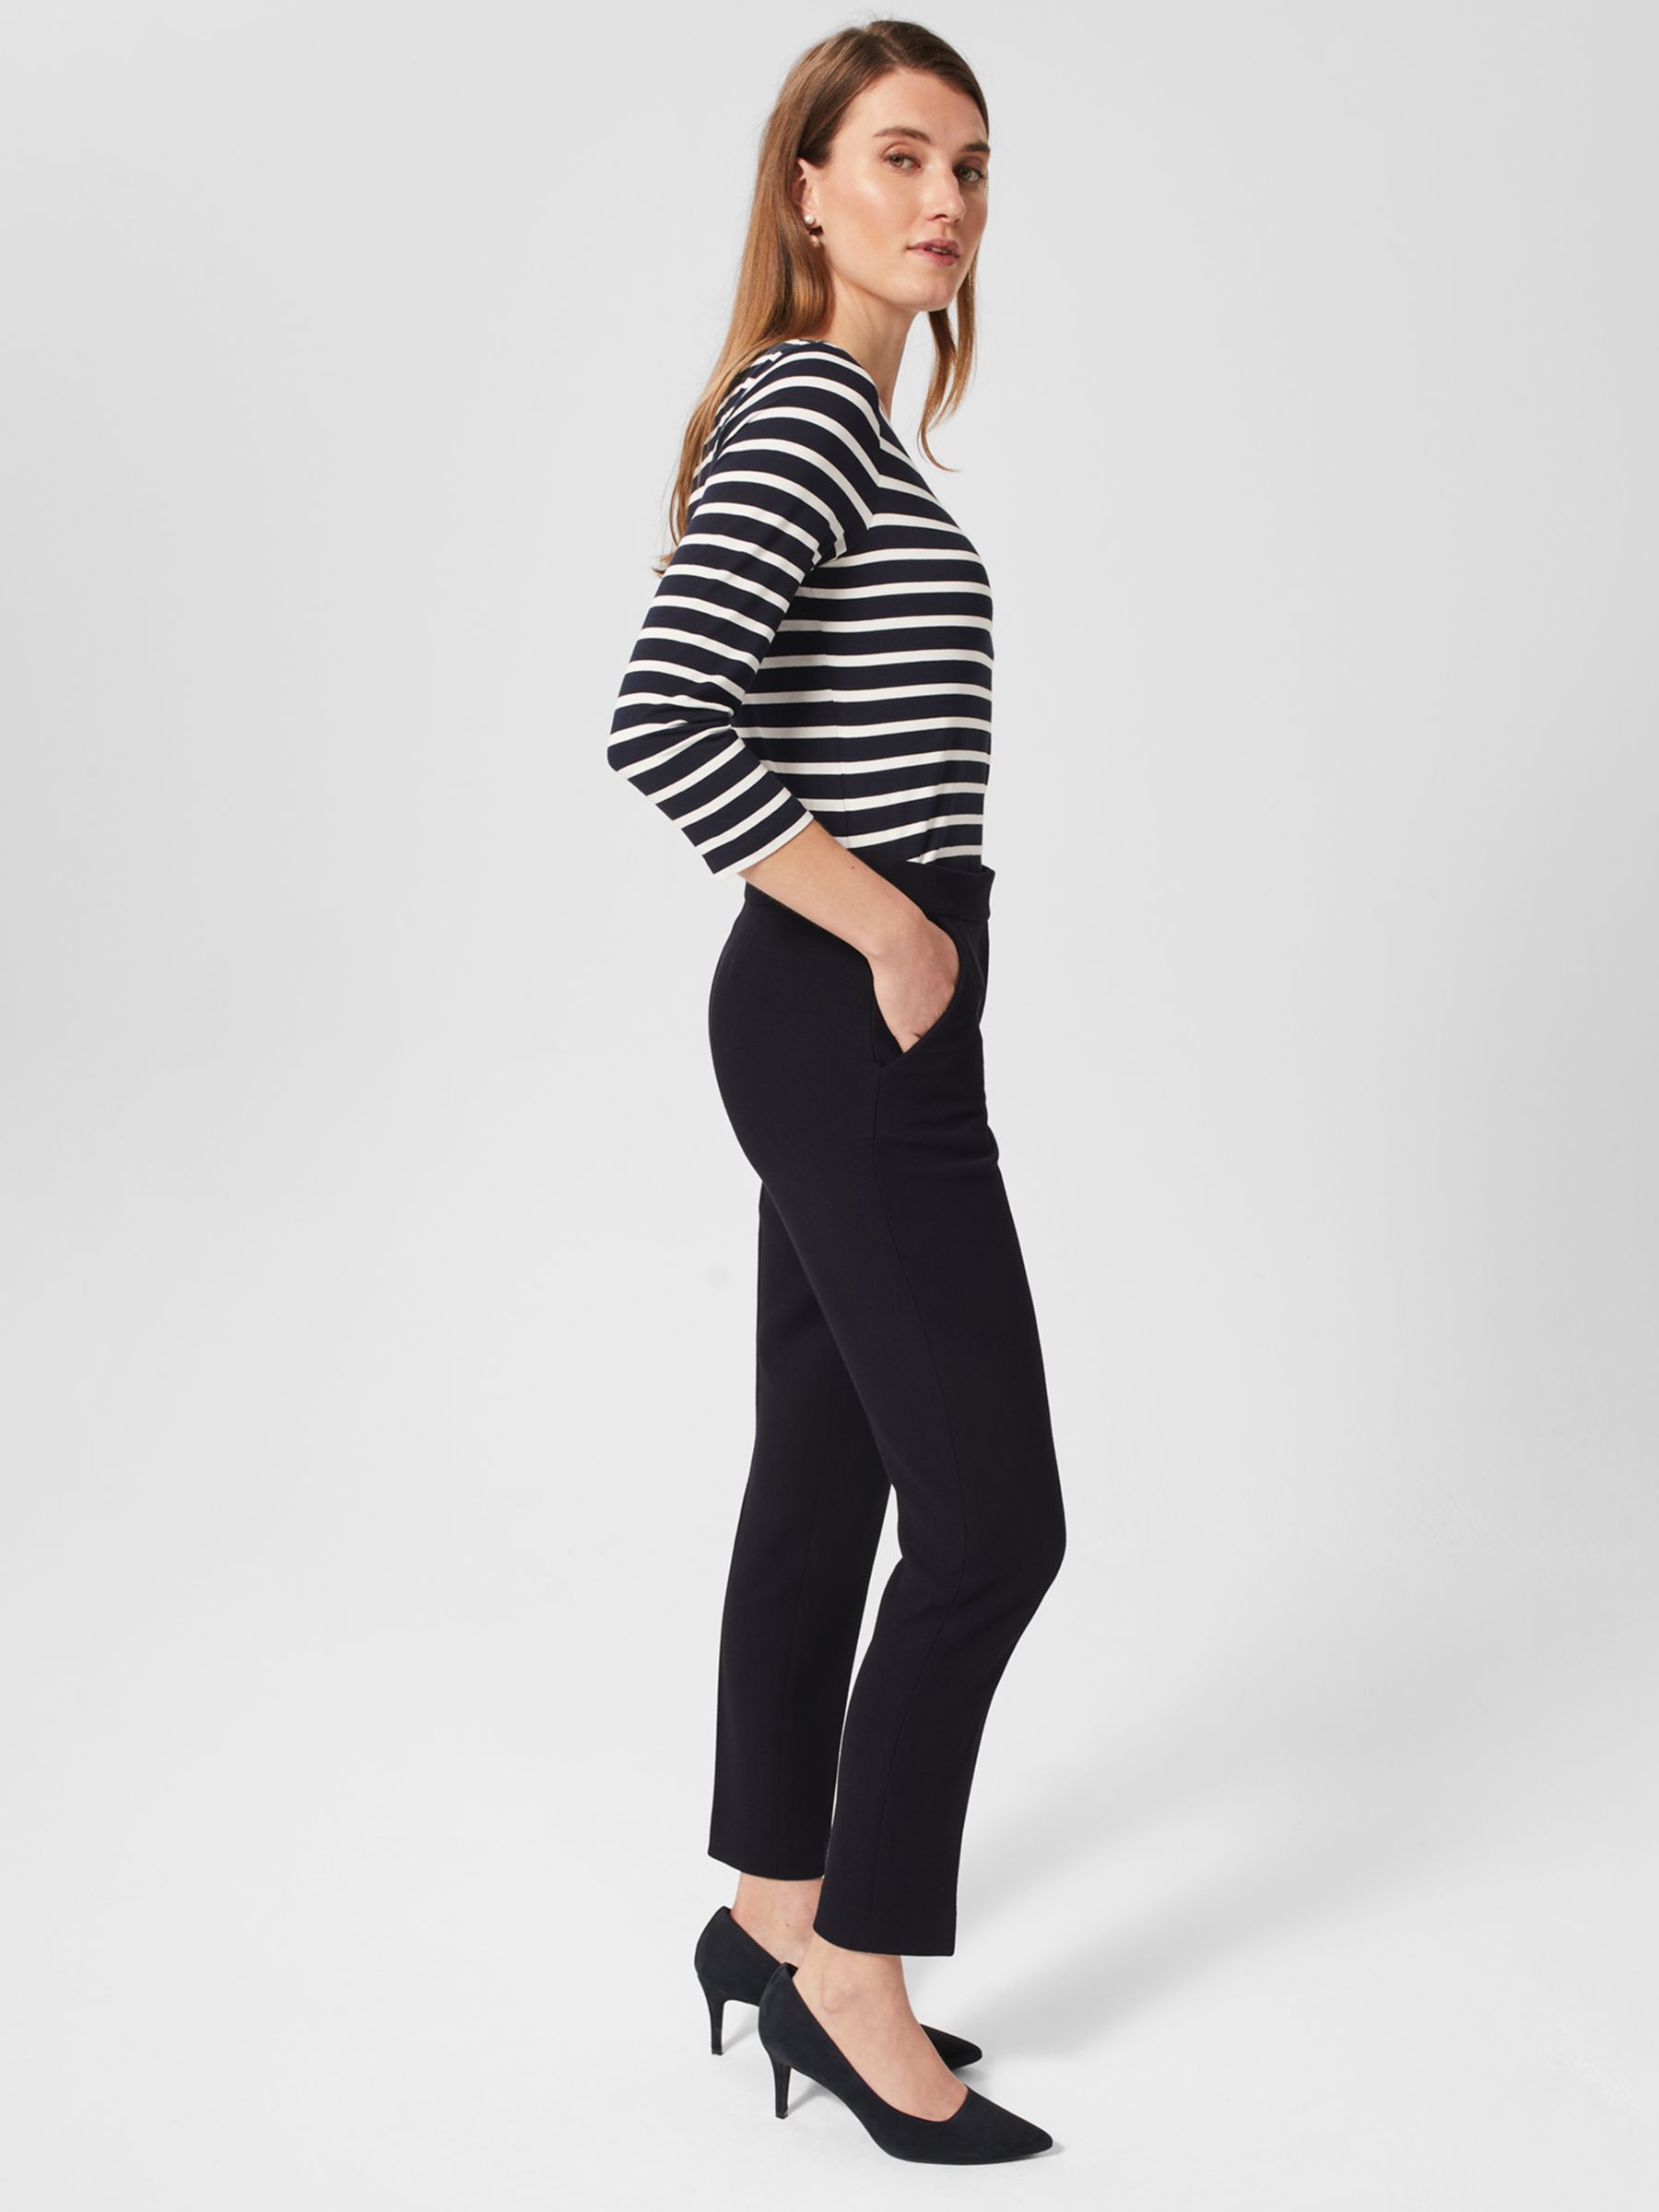 Hobbs Mia Tapered Ankle Grazer Trousers, Navy at John Lewis & Partners